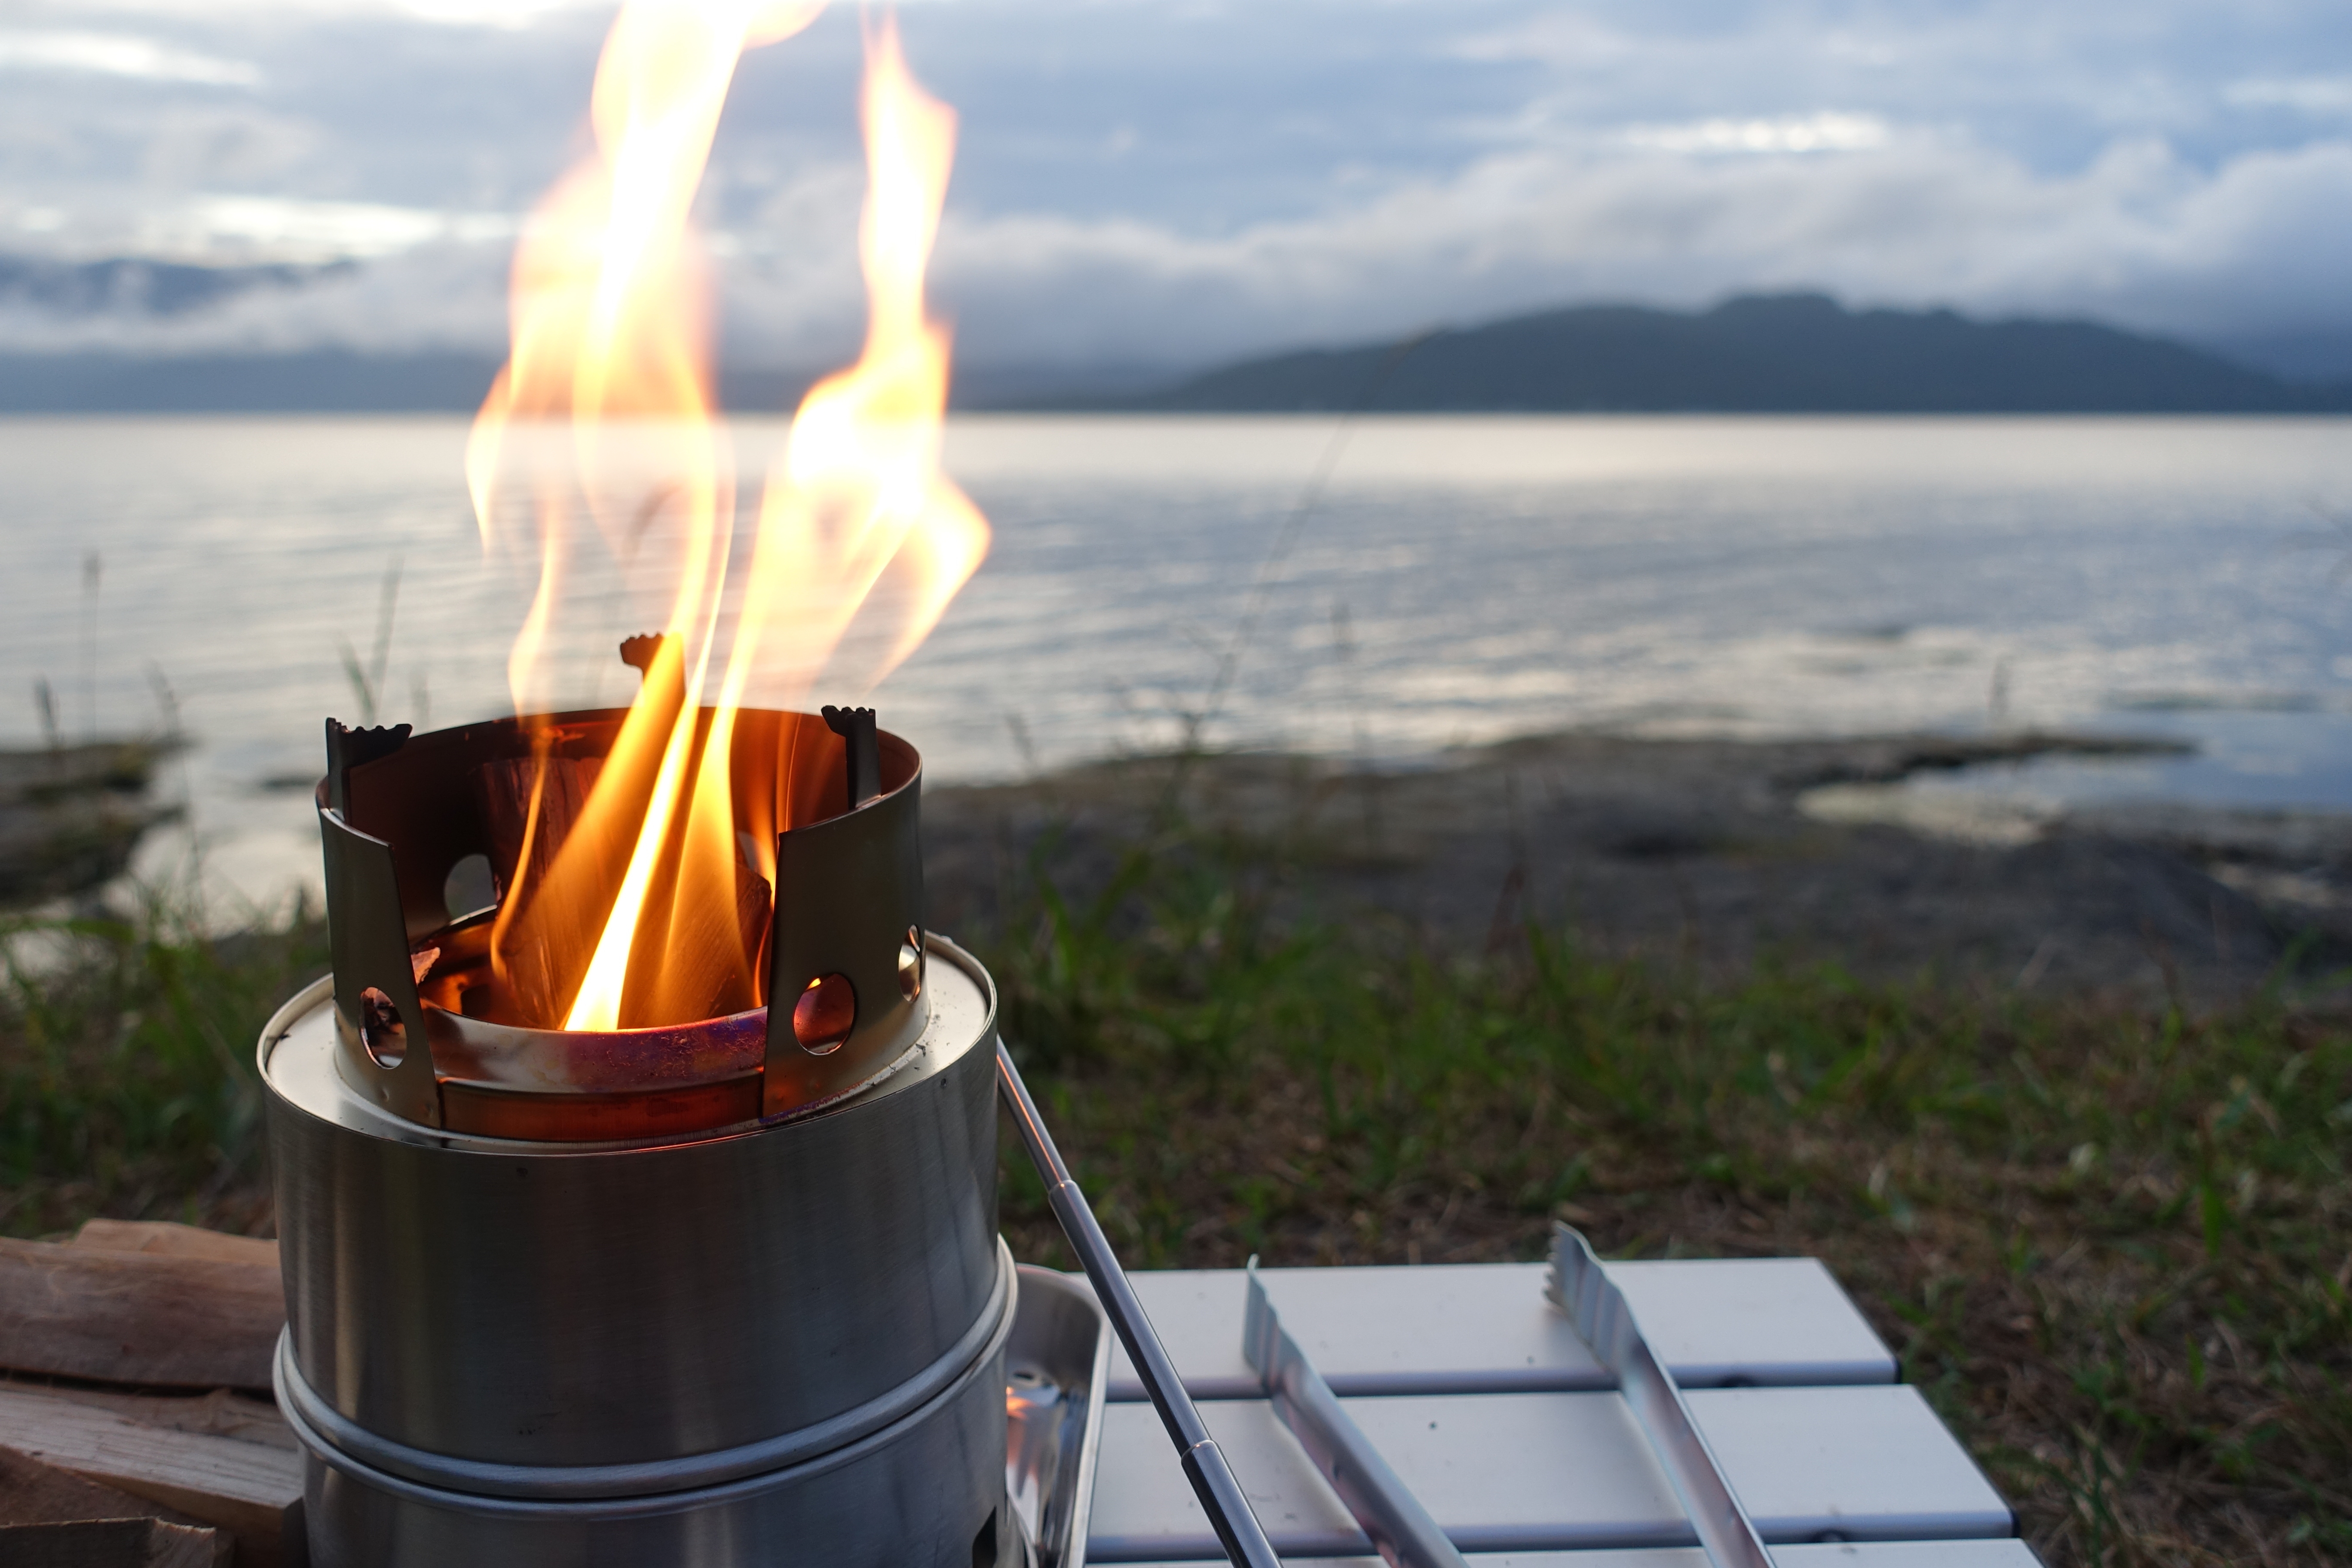 Solo Stove sitting on a table overlooking a lake